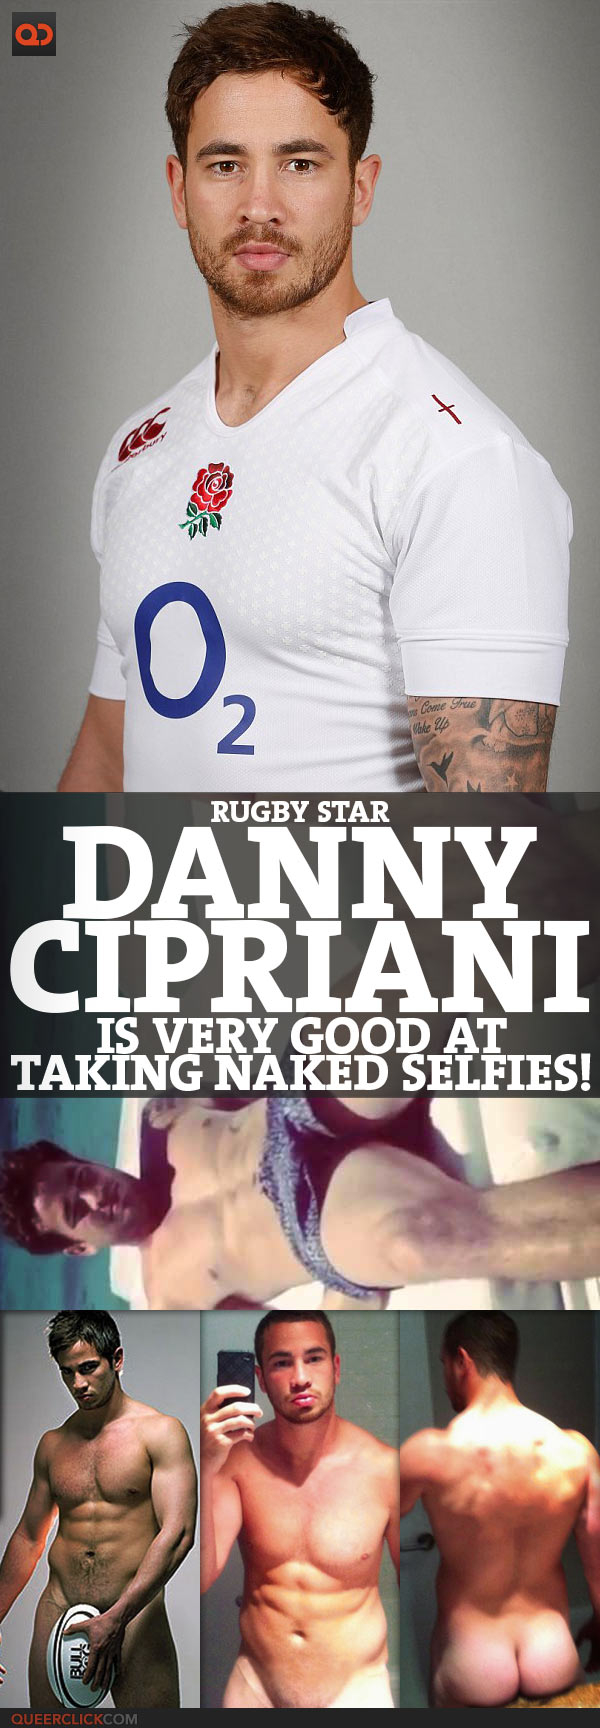 Rugby Star Danny Cipriani Is Very Good At Taking Naked Selfies!